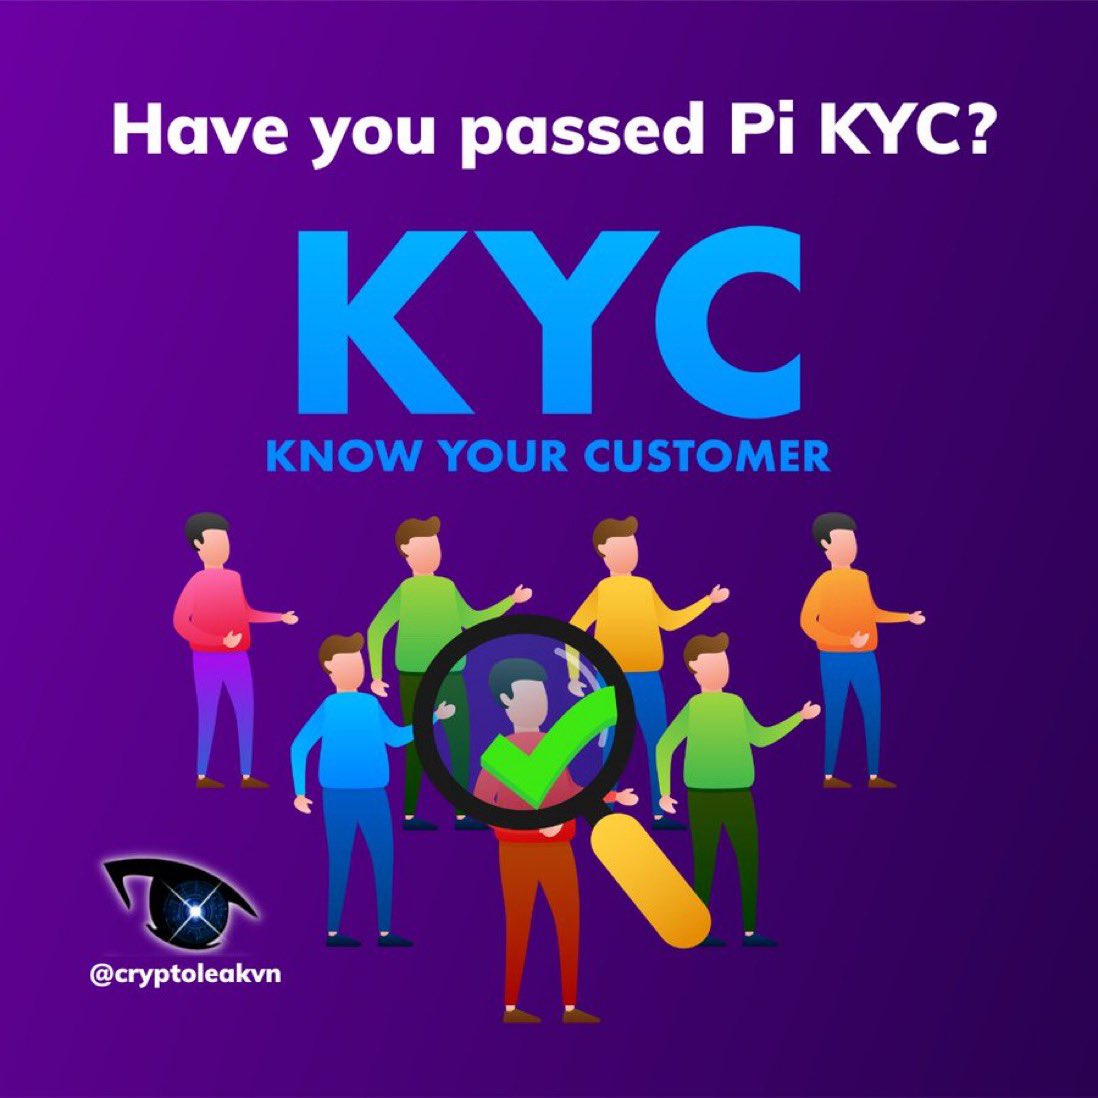 Recently, with the notable advancements made by the Pi Core Team, there have been significant improvements in the Pi Network's KYC process. The results of these efforts are evident as many pioneers have successfully passed the KYC verification.

So, how about you? Have you